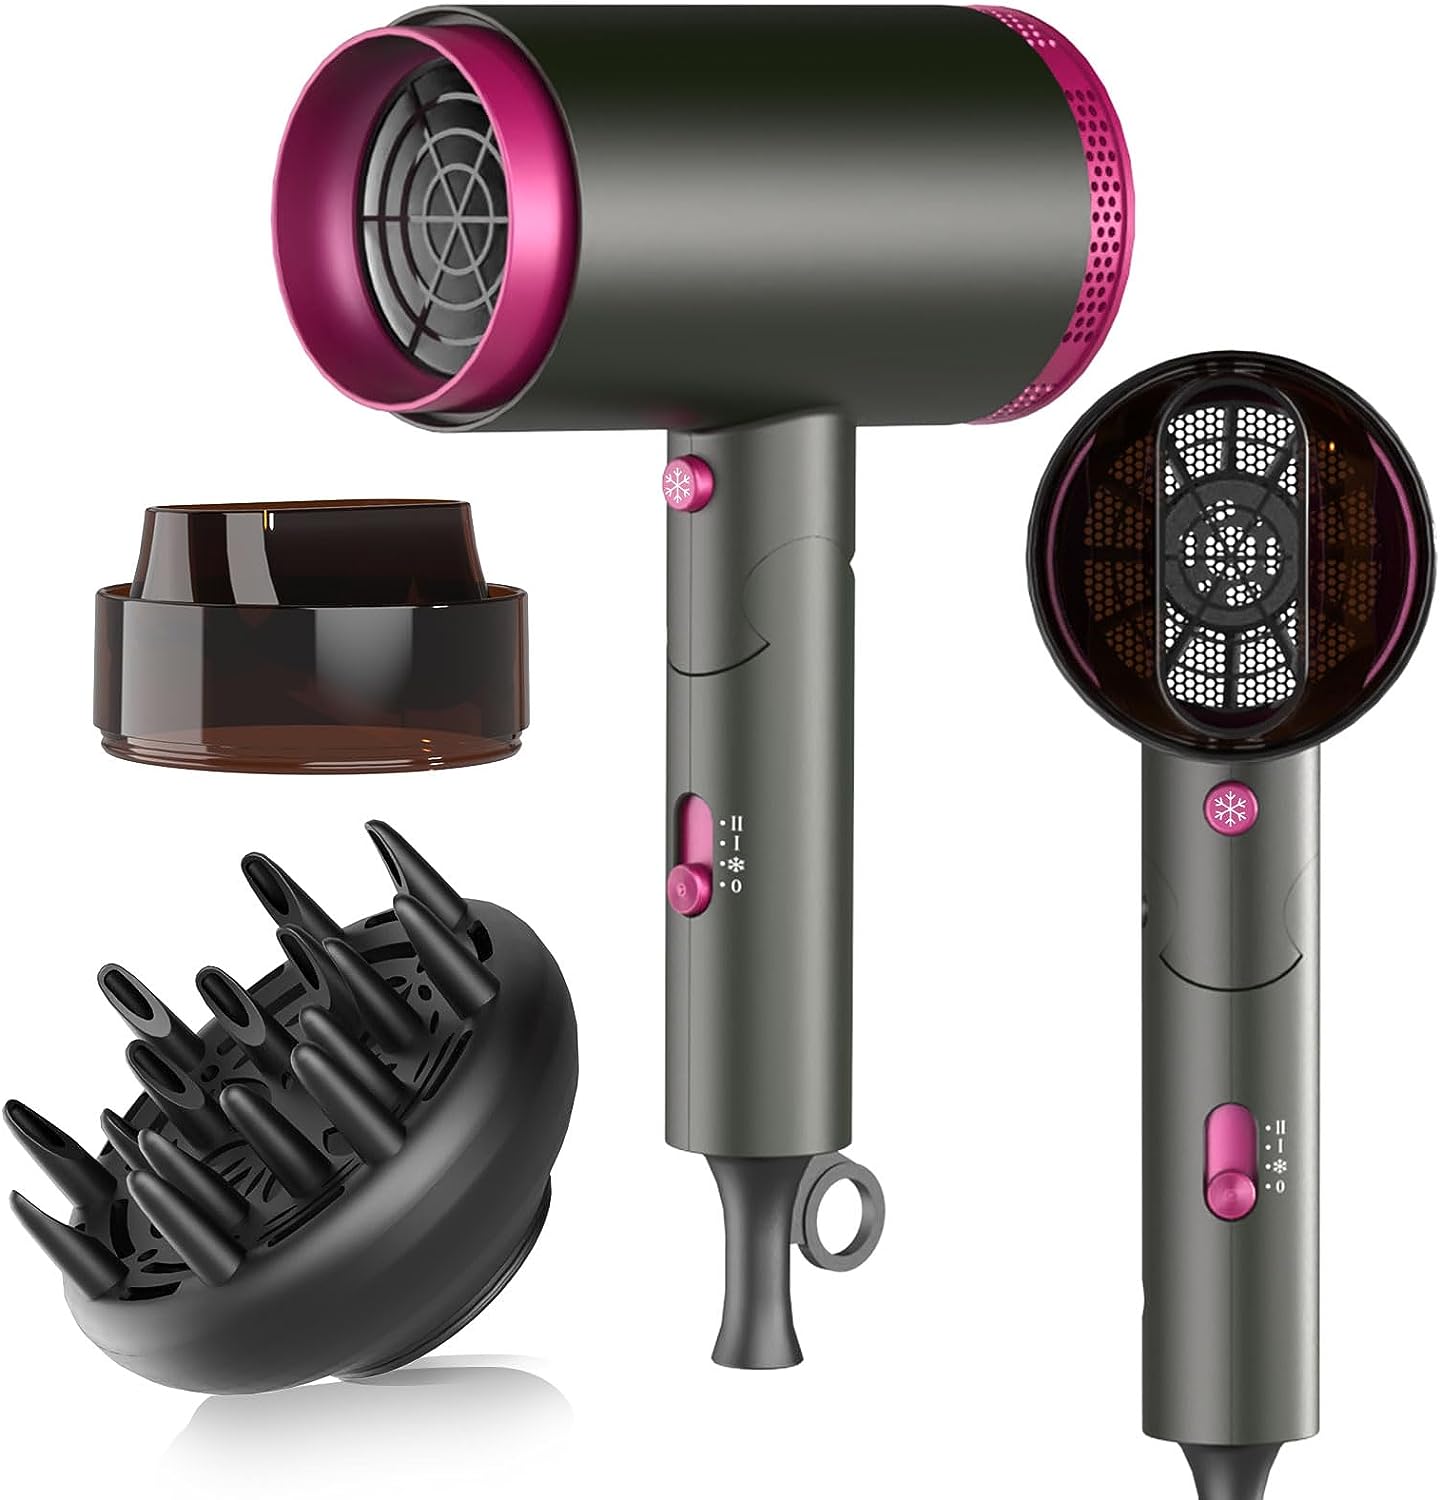 11 Pros & Cons of The LARMHOI Hair Dryer